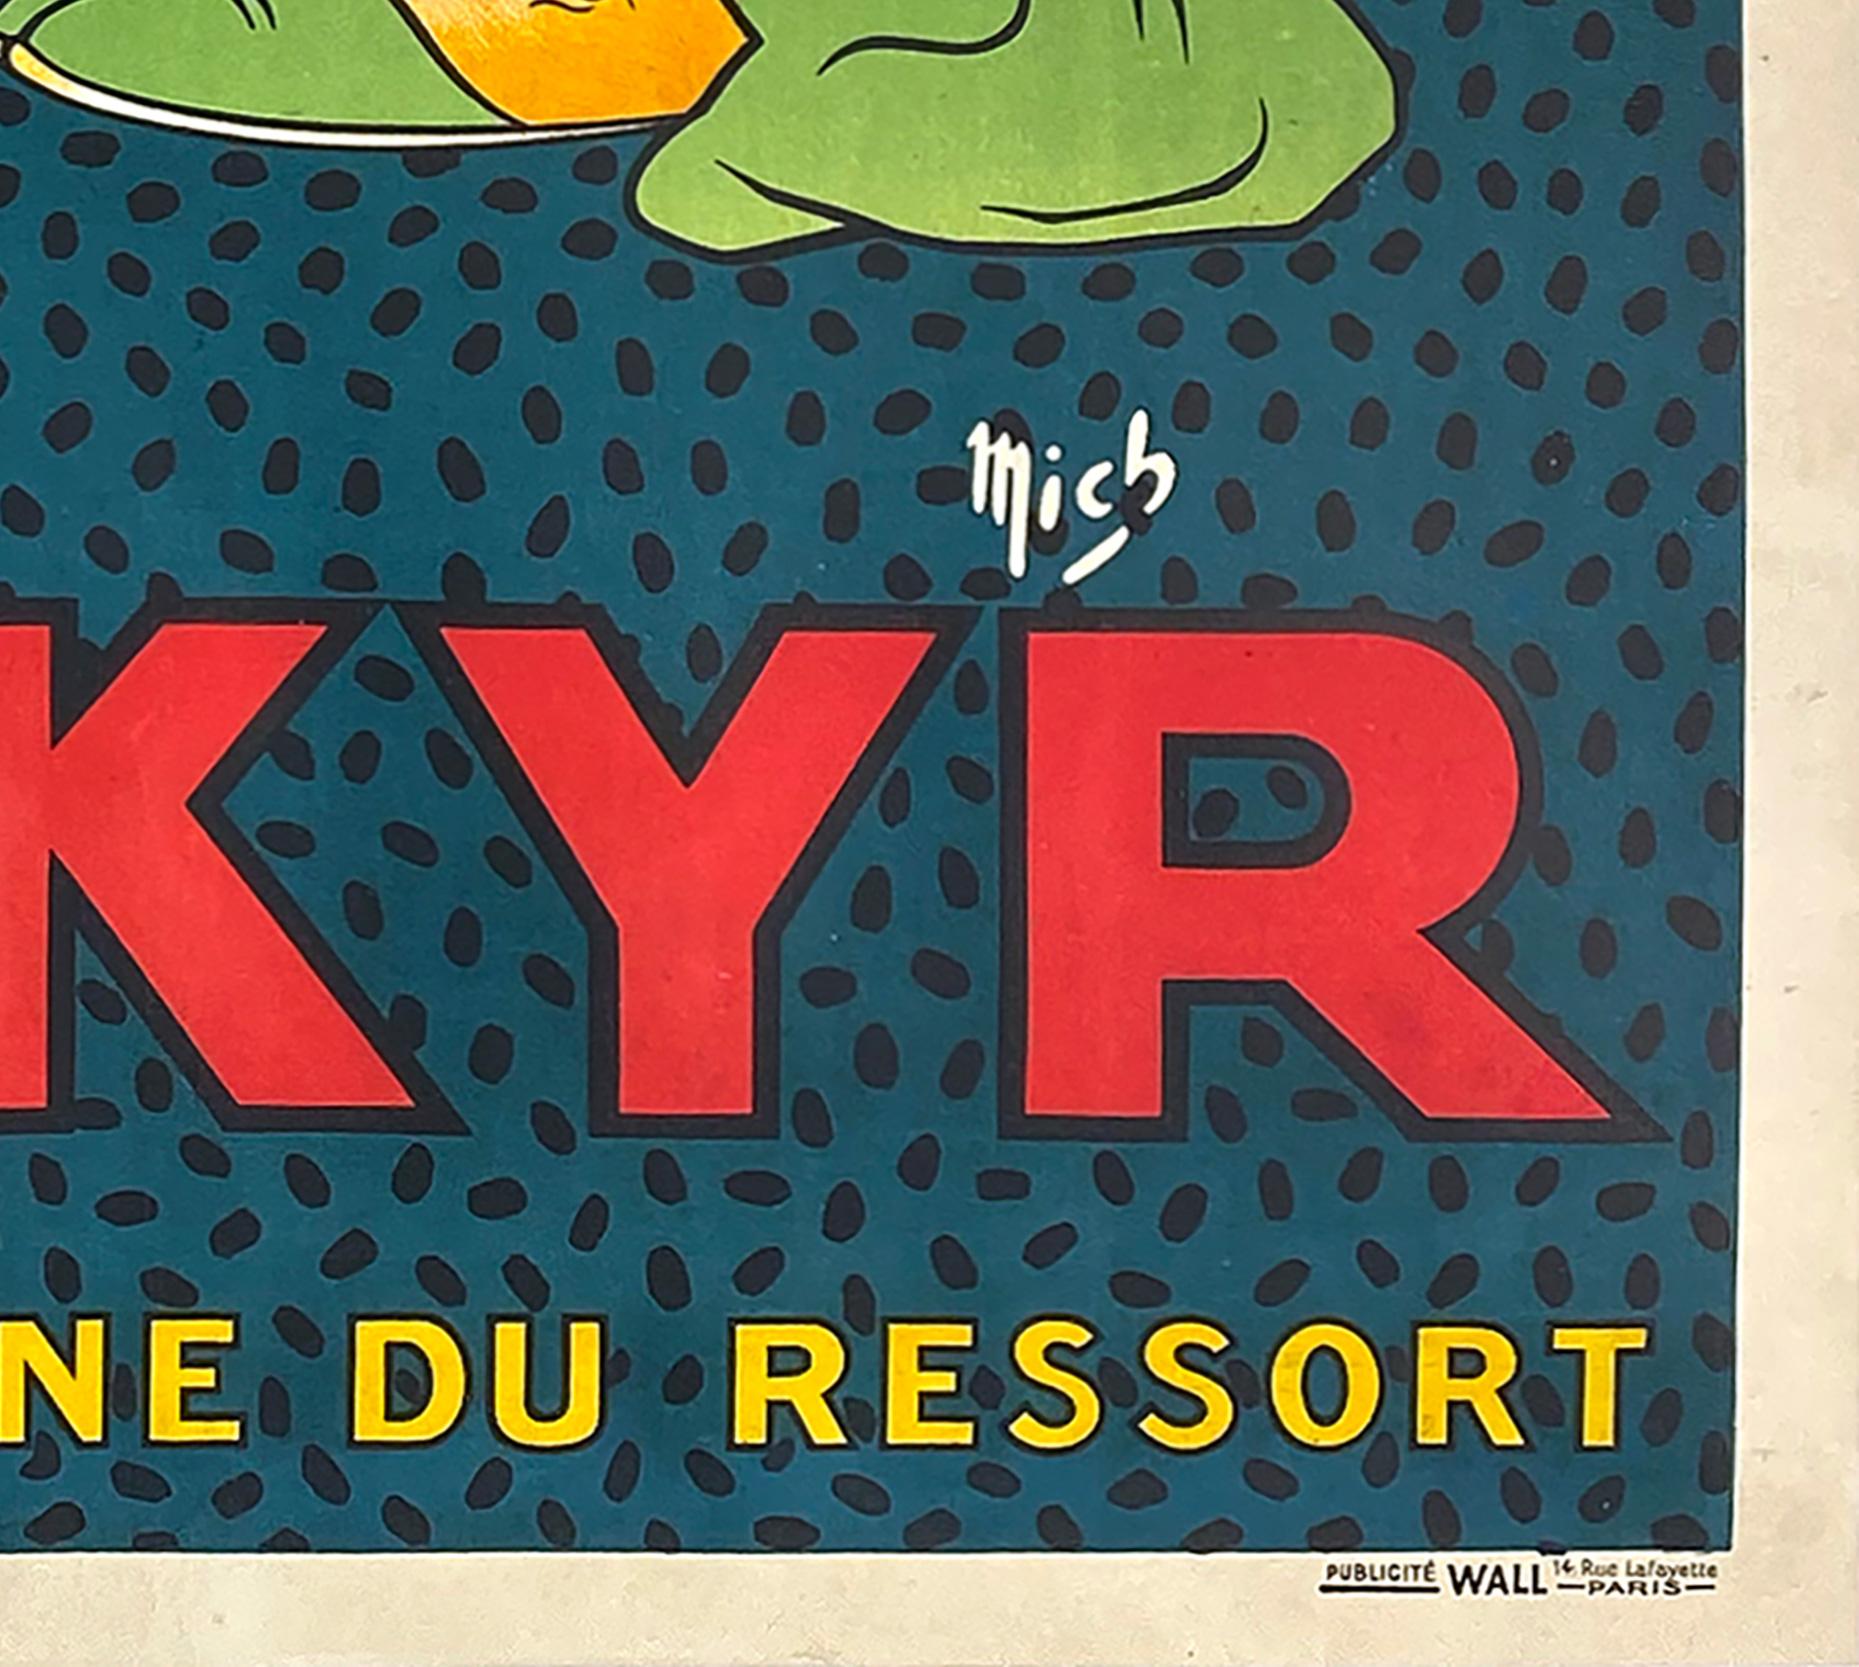 Le Fakyr, C1920 Vintage French Alcohol Advertising Poster, Michel Liebeaux 2